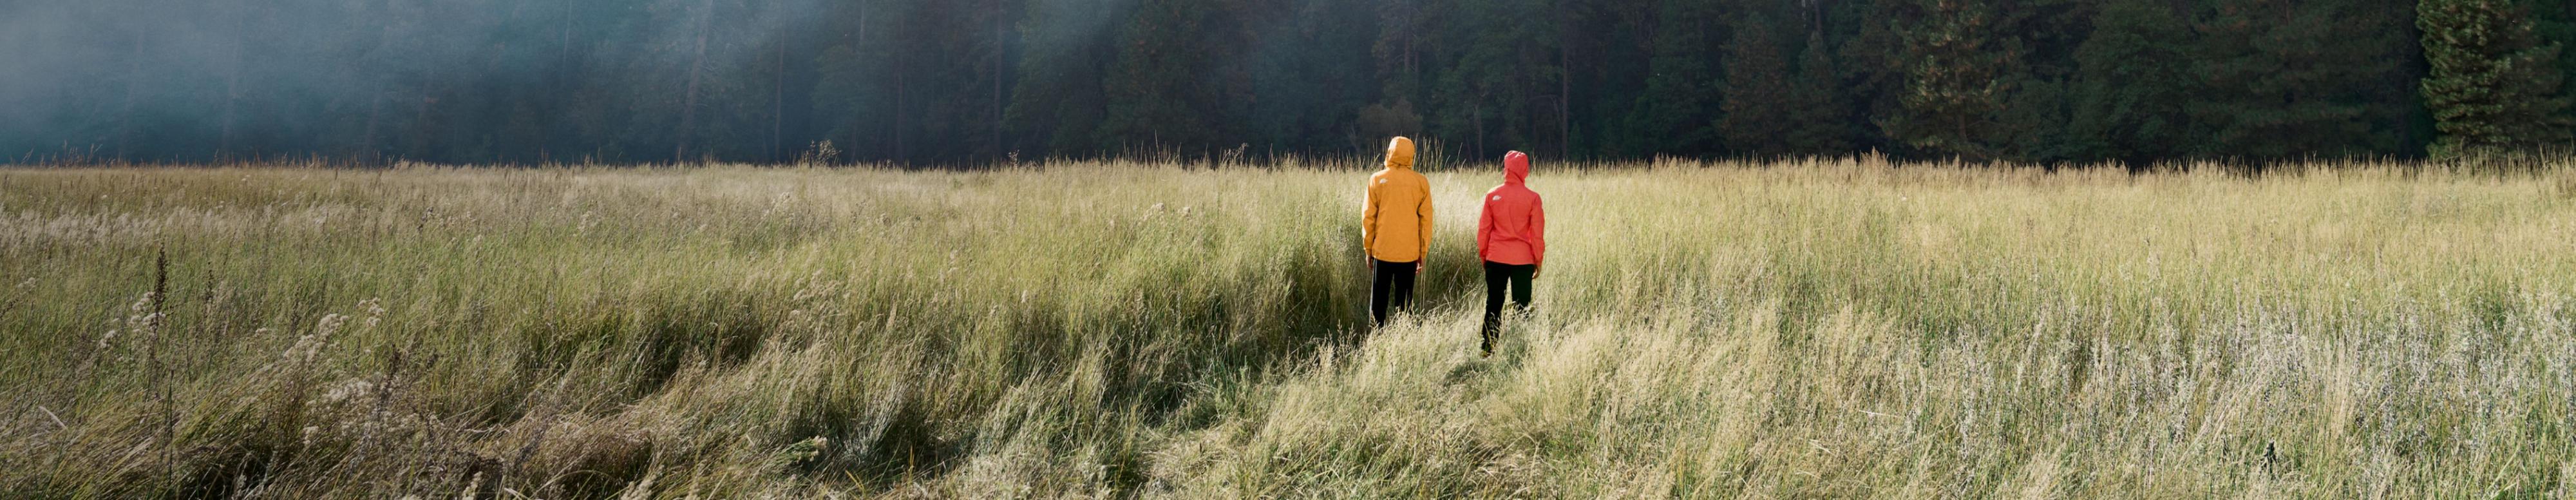 Two people are standing in a grassy field, with their hoods up, wearing rain coats from The North Face. Text reads: “Wind. Rain. We’ve got you covered.” 